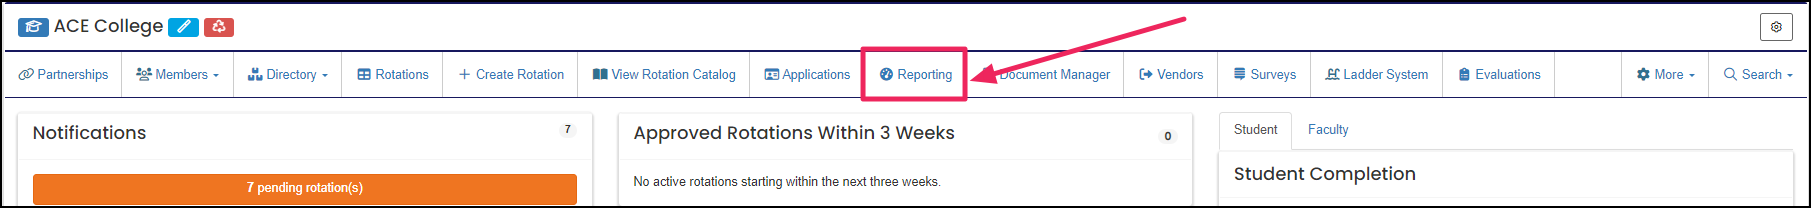 home page highlighting Reporting button on nav bar